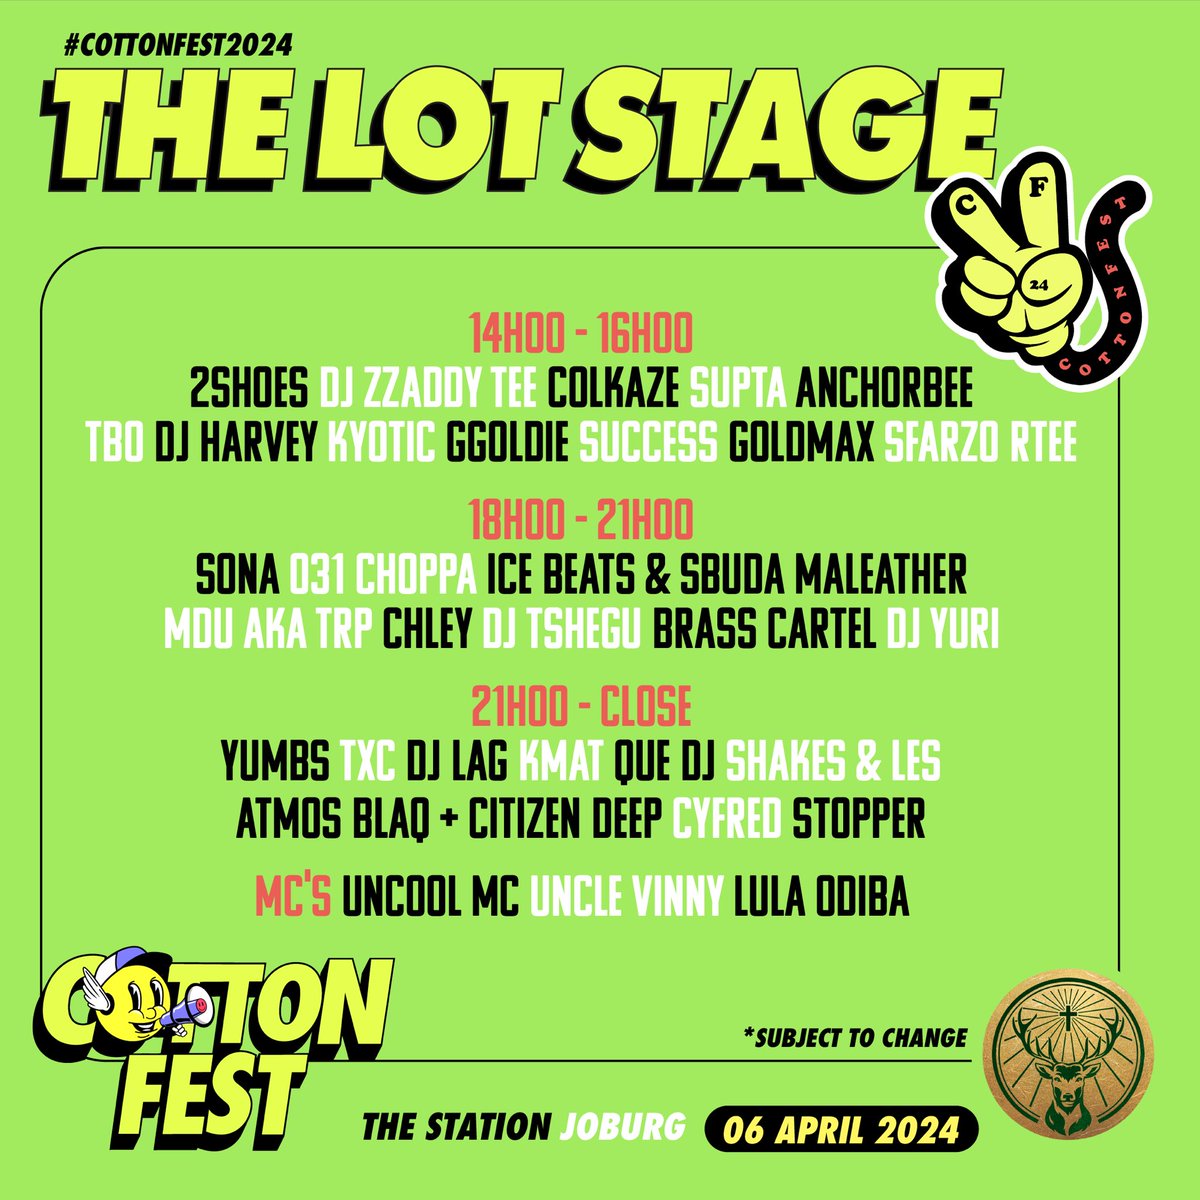 Cotton Eaters, the full lineup for UCF JOBURG has arrived 🔥 The stages have been set up to give you the ultimate sonic experience 🔊 WE NEVER DIE. WE MULTIPLY! #cottonfest #johannesburg #votecottonfest #votemusic #votelifestyle #votefashion #votesport #voteart